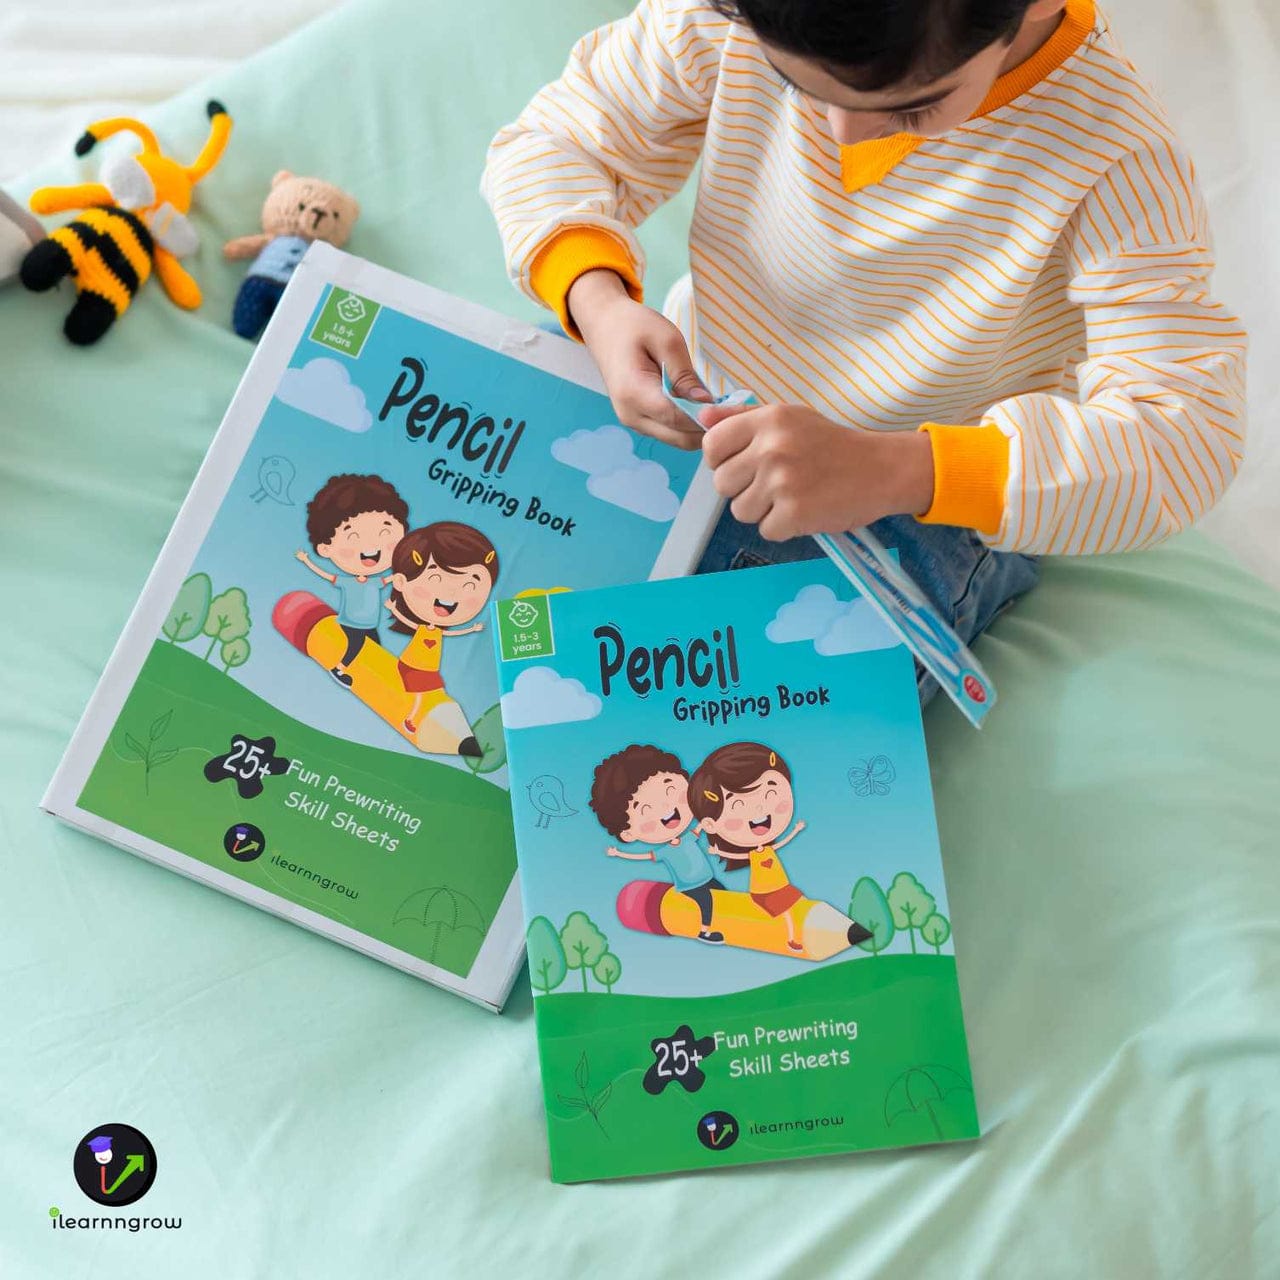 Pencil Gripping Learning Book